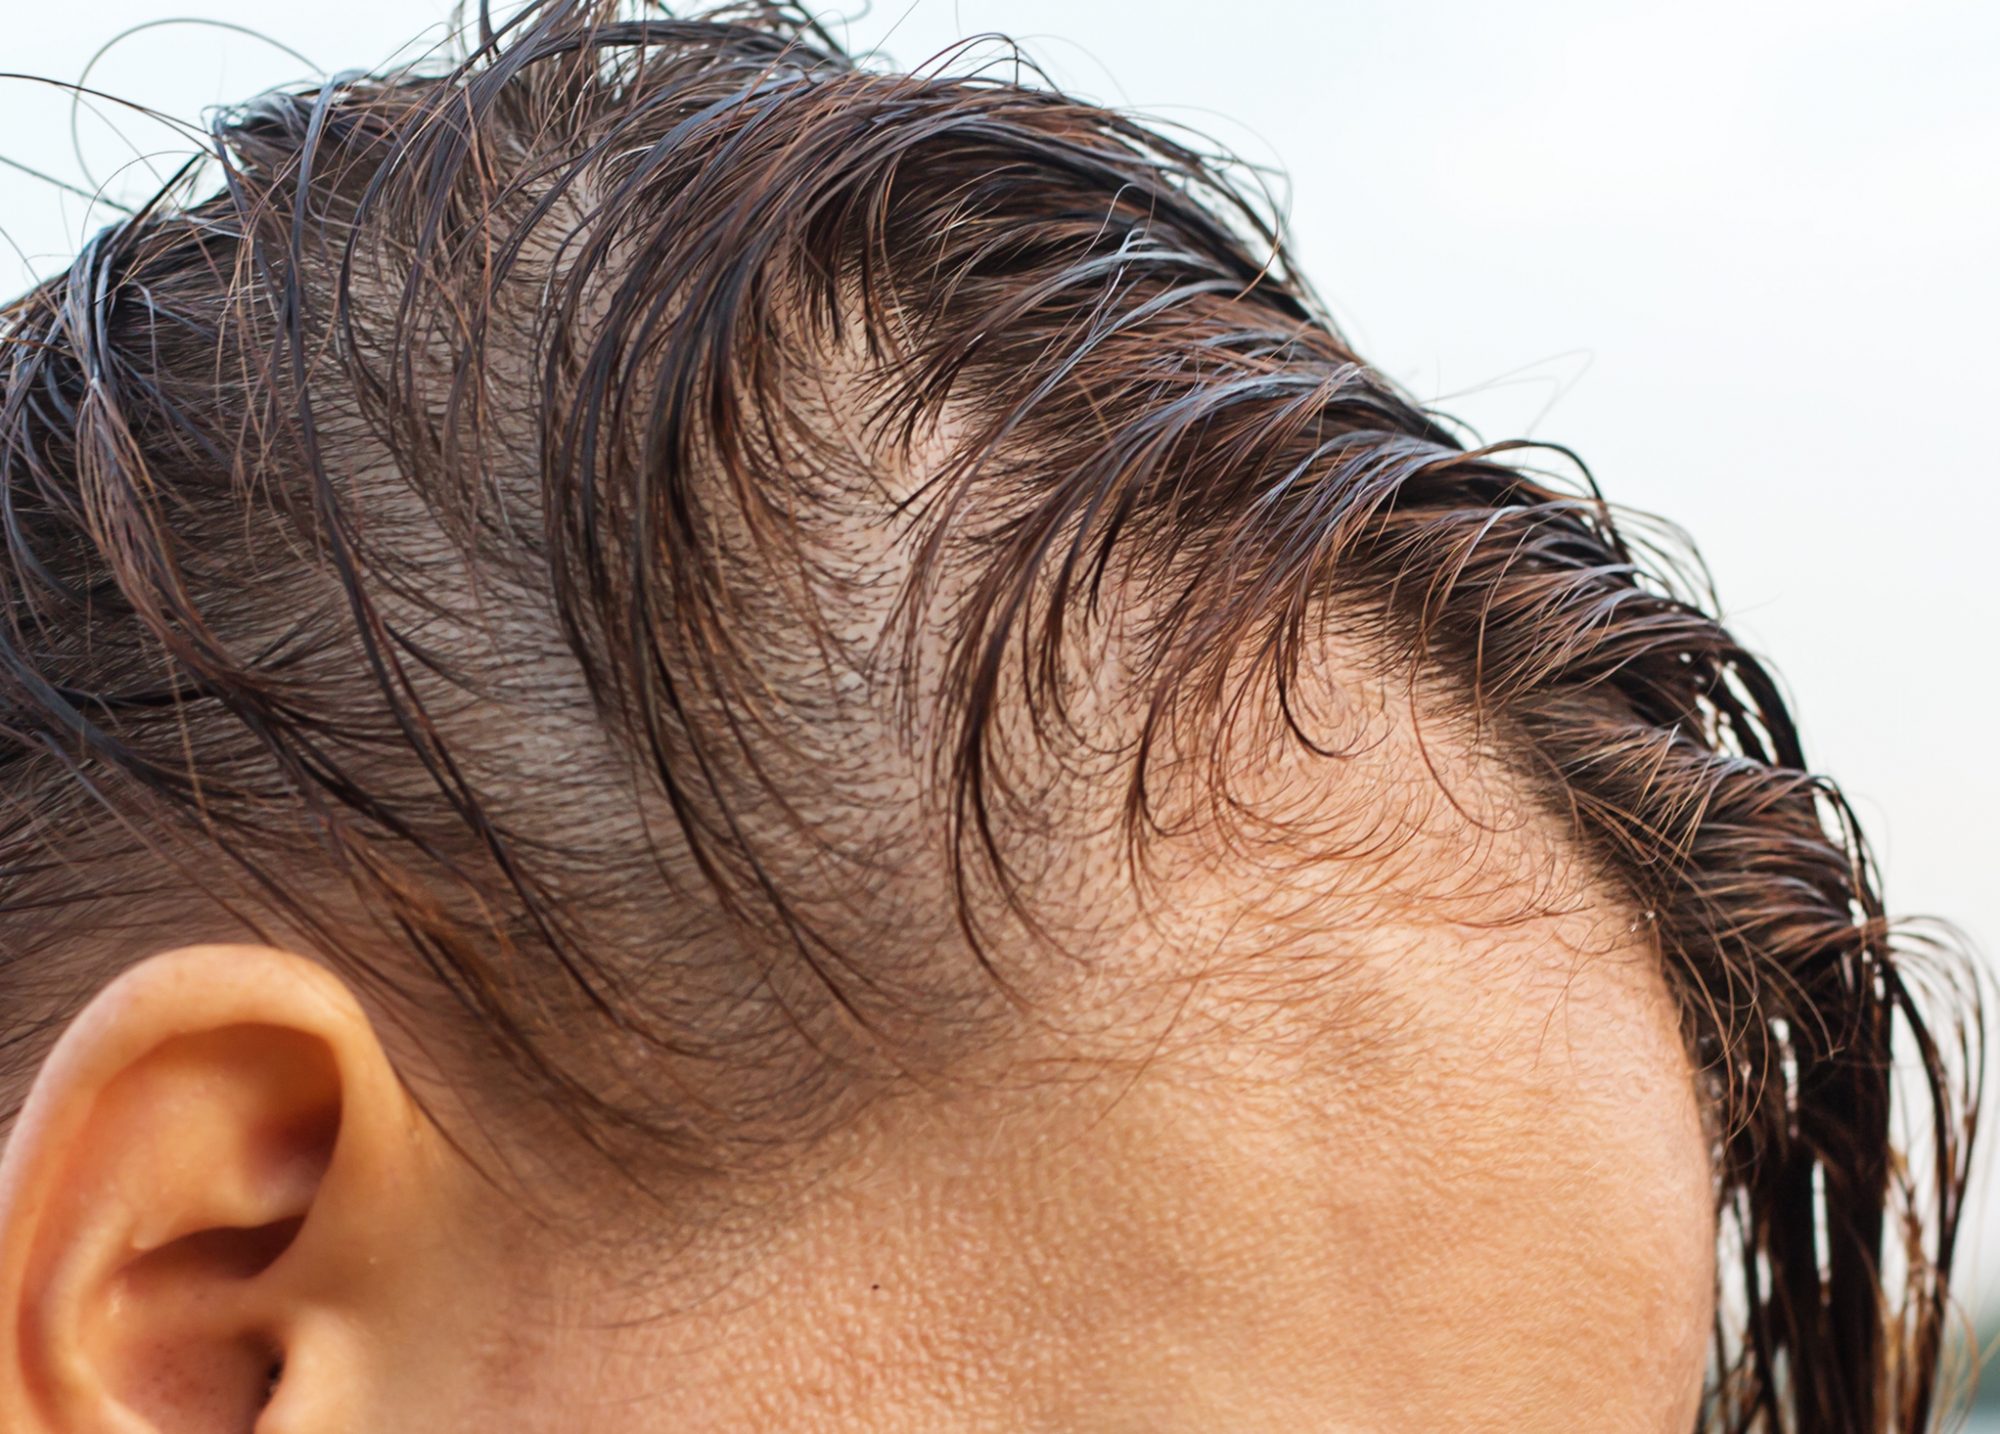 SCUBE3 as a treatment for hair loss and alopecia